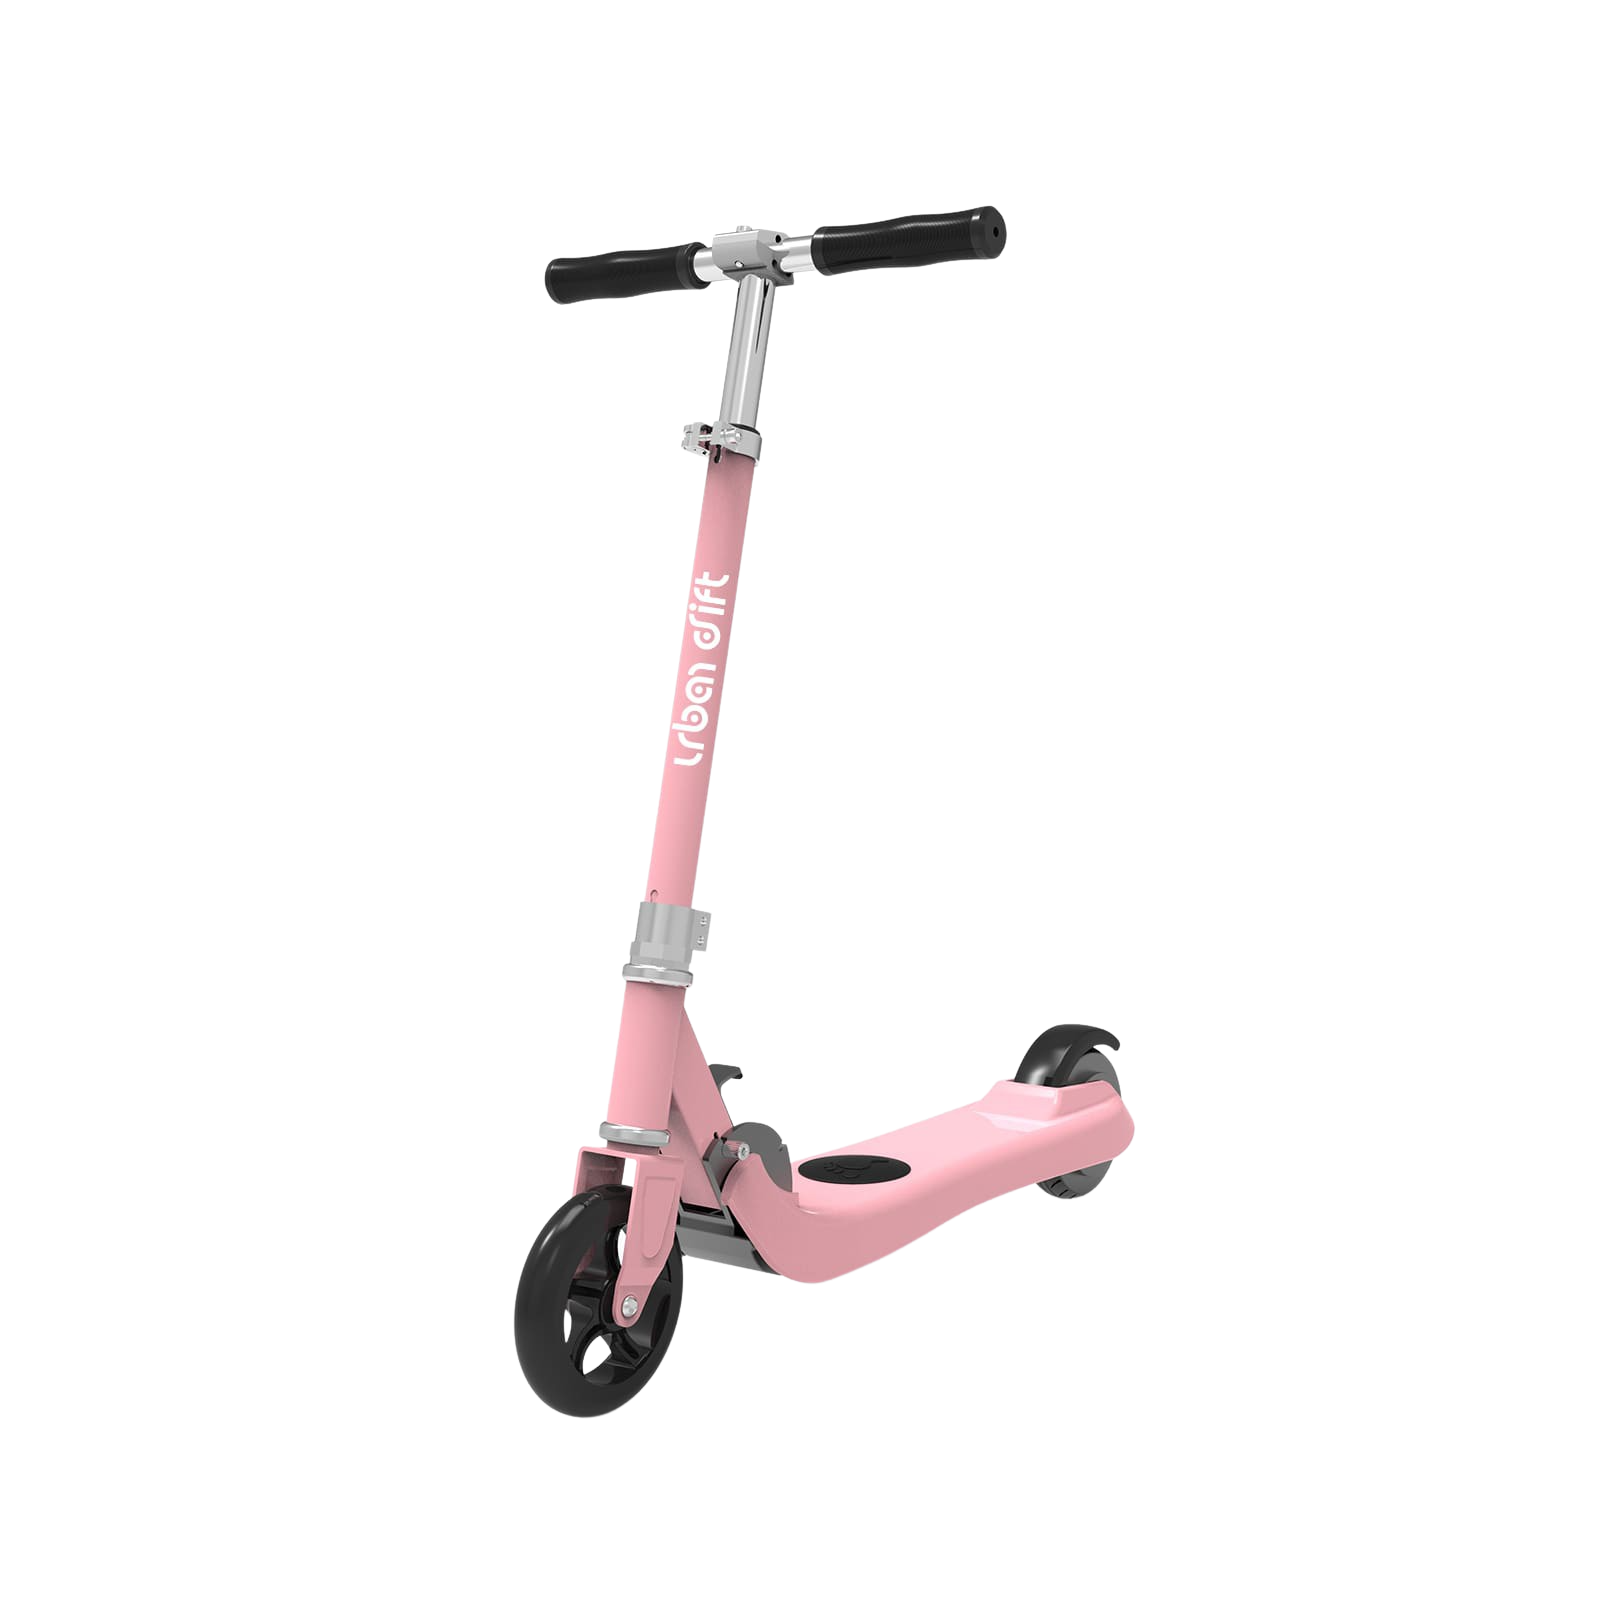 Urban Drift, Urban Drift K1 Up to 4 Mile Range 3.7 MPH 10" Electric Scooter for Kids New